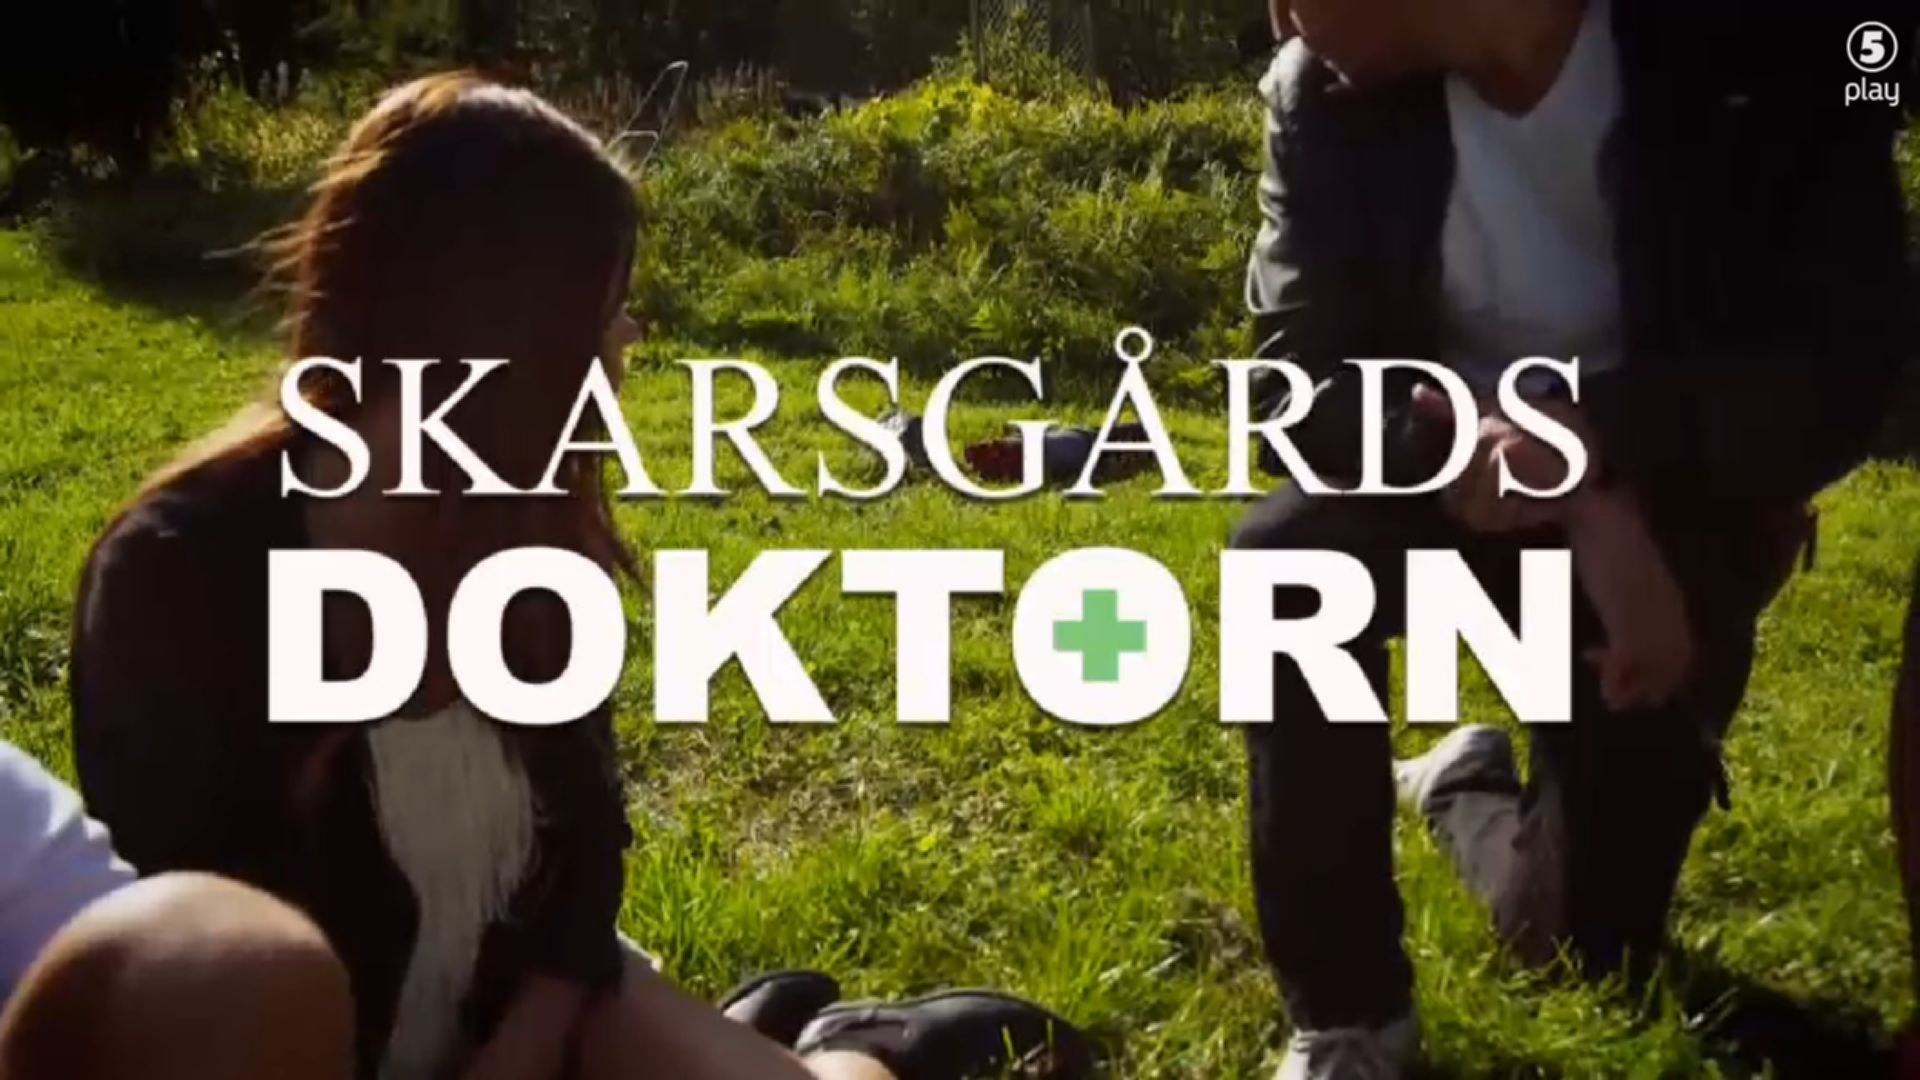 Footage from Swedish TV Series 